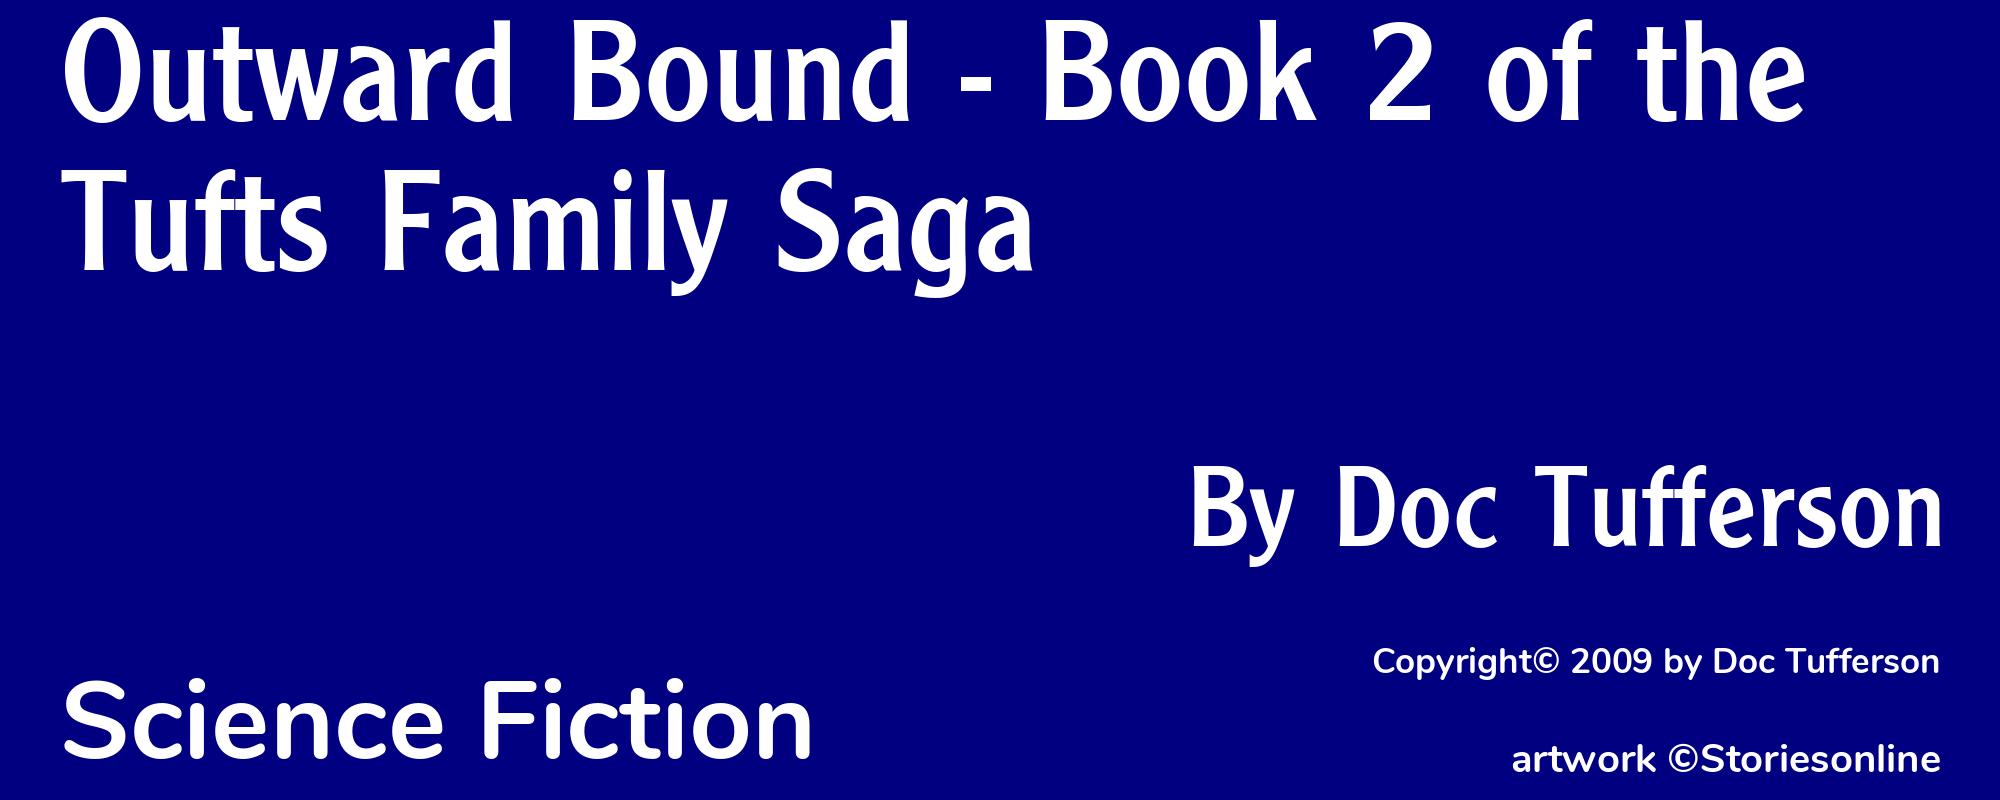 Outward Bound - Book 2 of the Tufts Family Saga - Cover